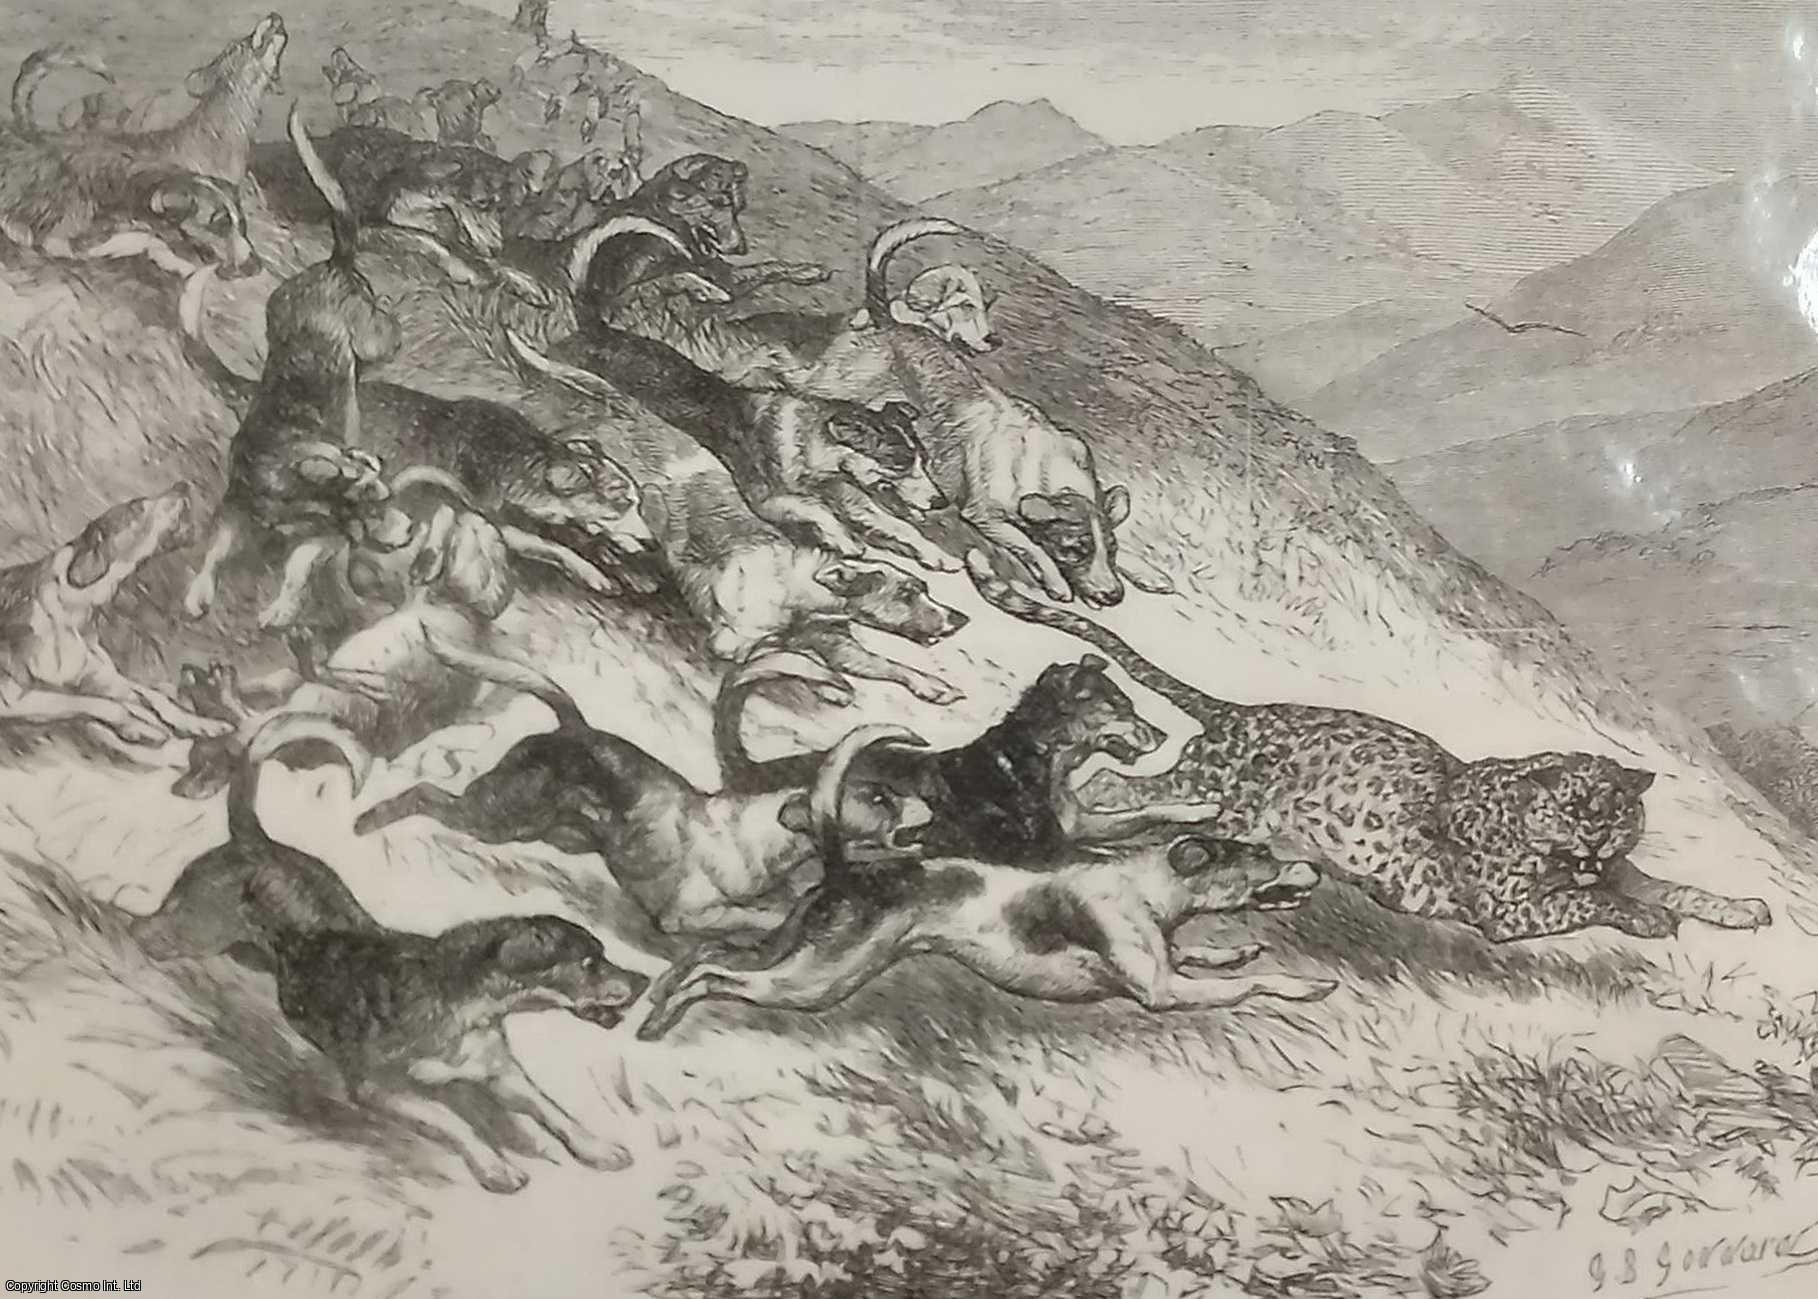 LEOPARD HUNT - Hunting in India; a Leopard Hunt with Foxhounds at Ootacamund. An original print and accompanying article from the Illustrated London News, 1869.